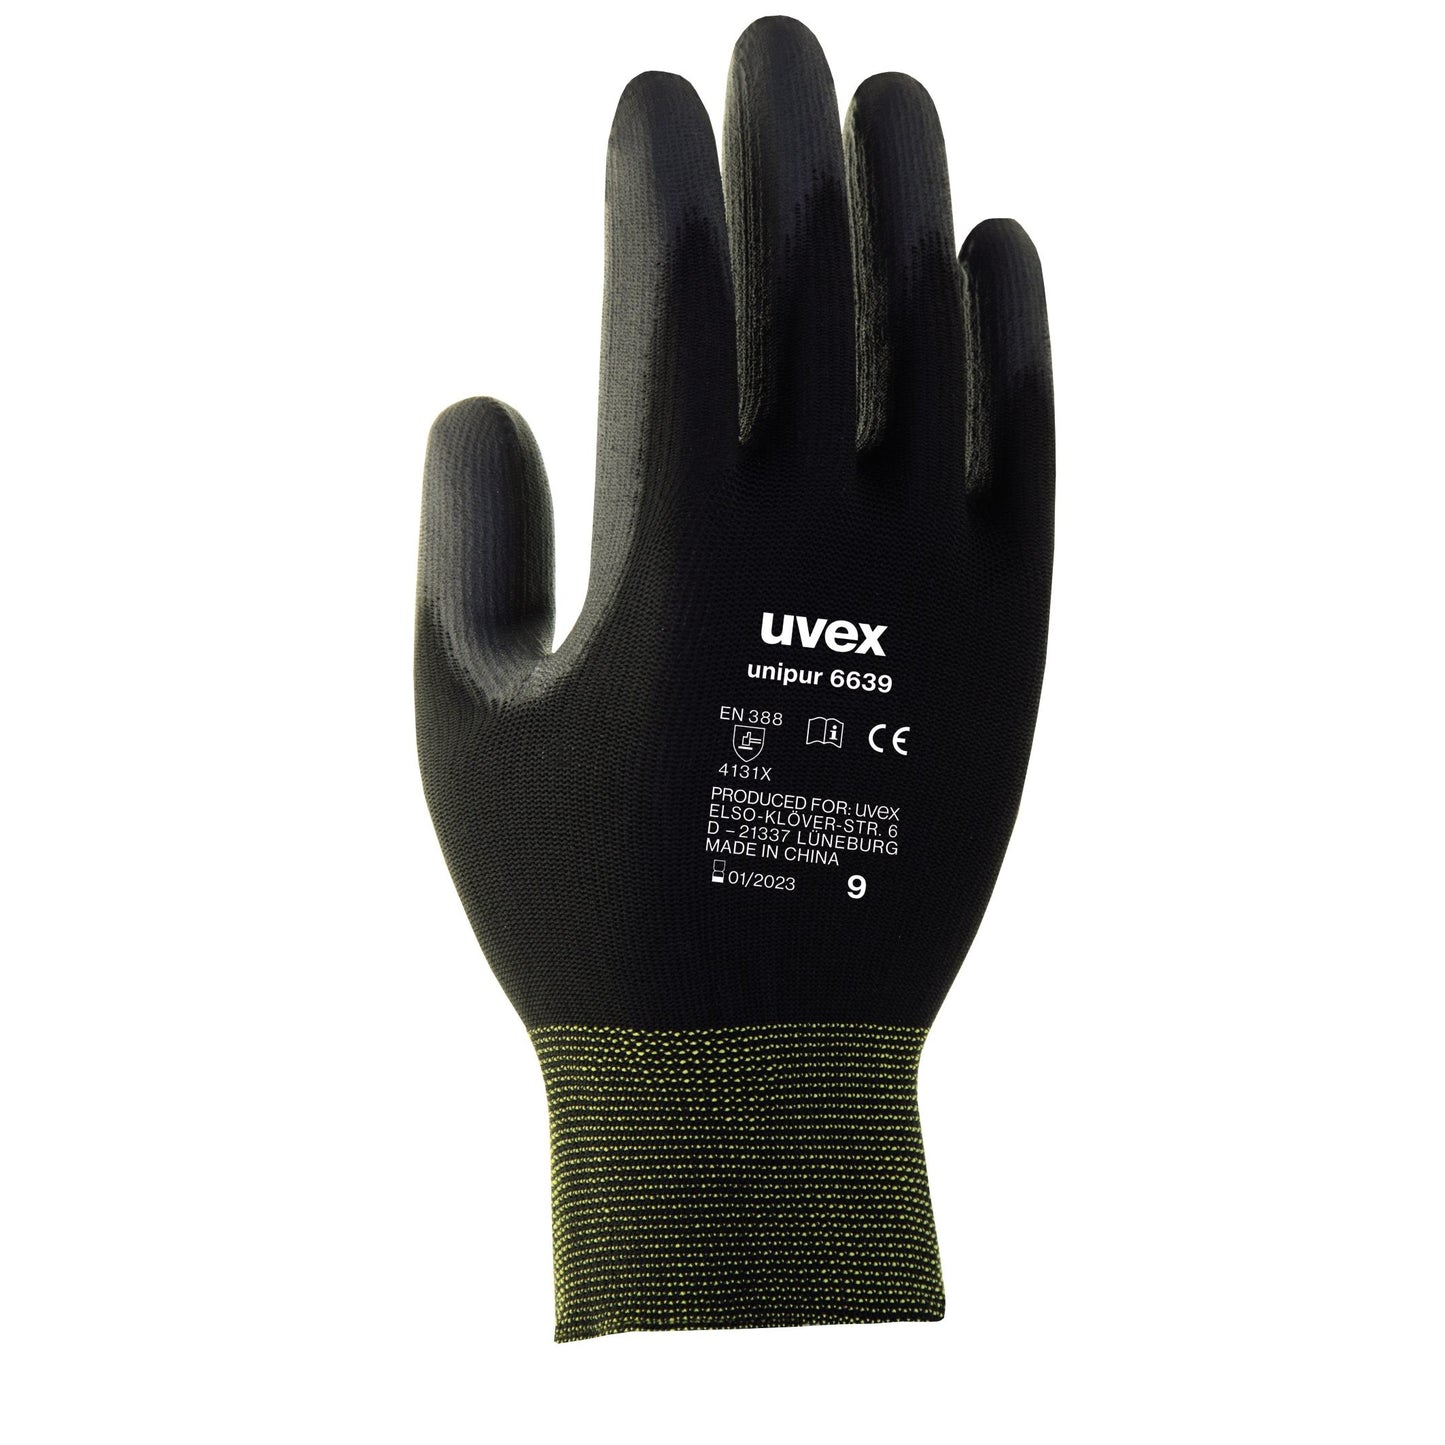 Uvex Unipur 6639 Safety Glove - Dirt-Resistant PU Glove for Precision Mechanical Work (Min 30 Pcs)